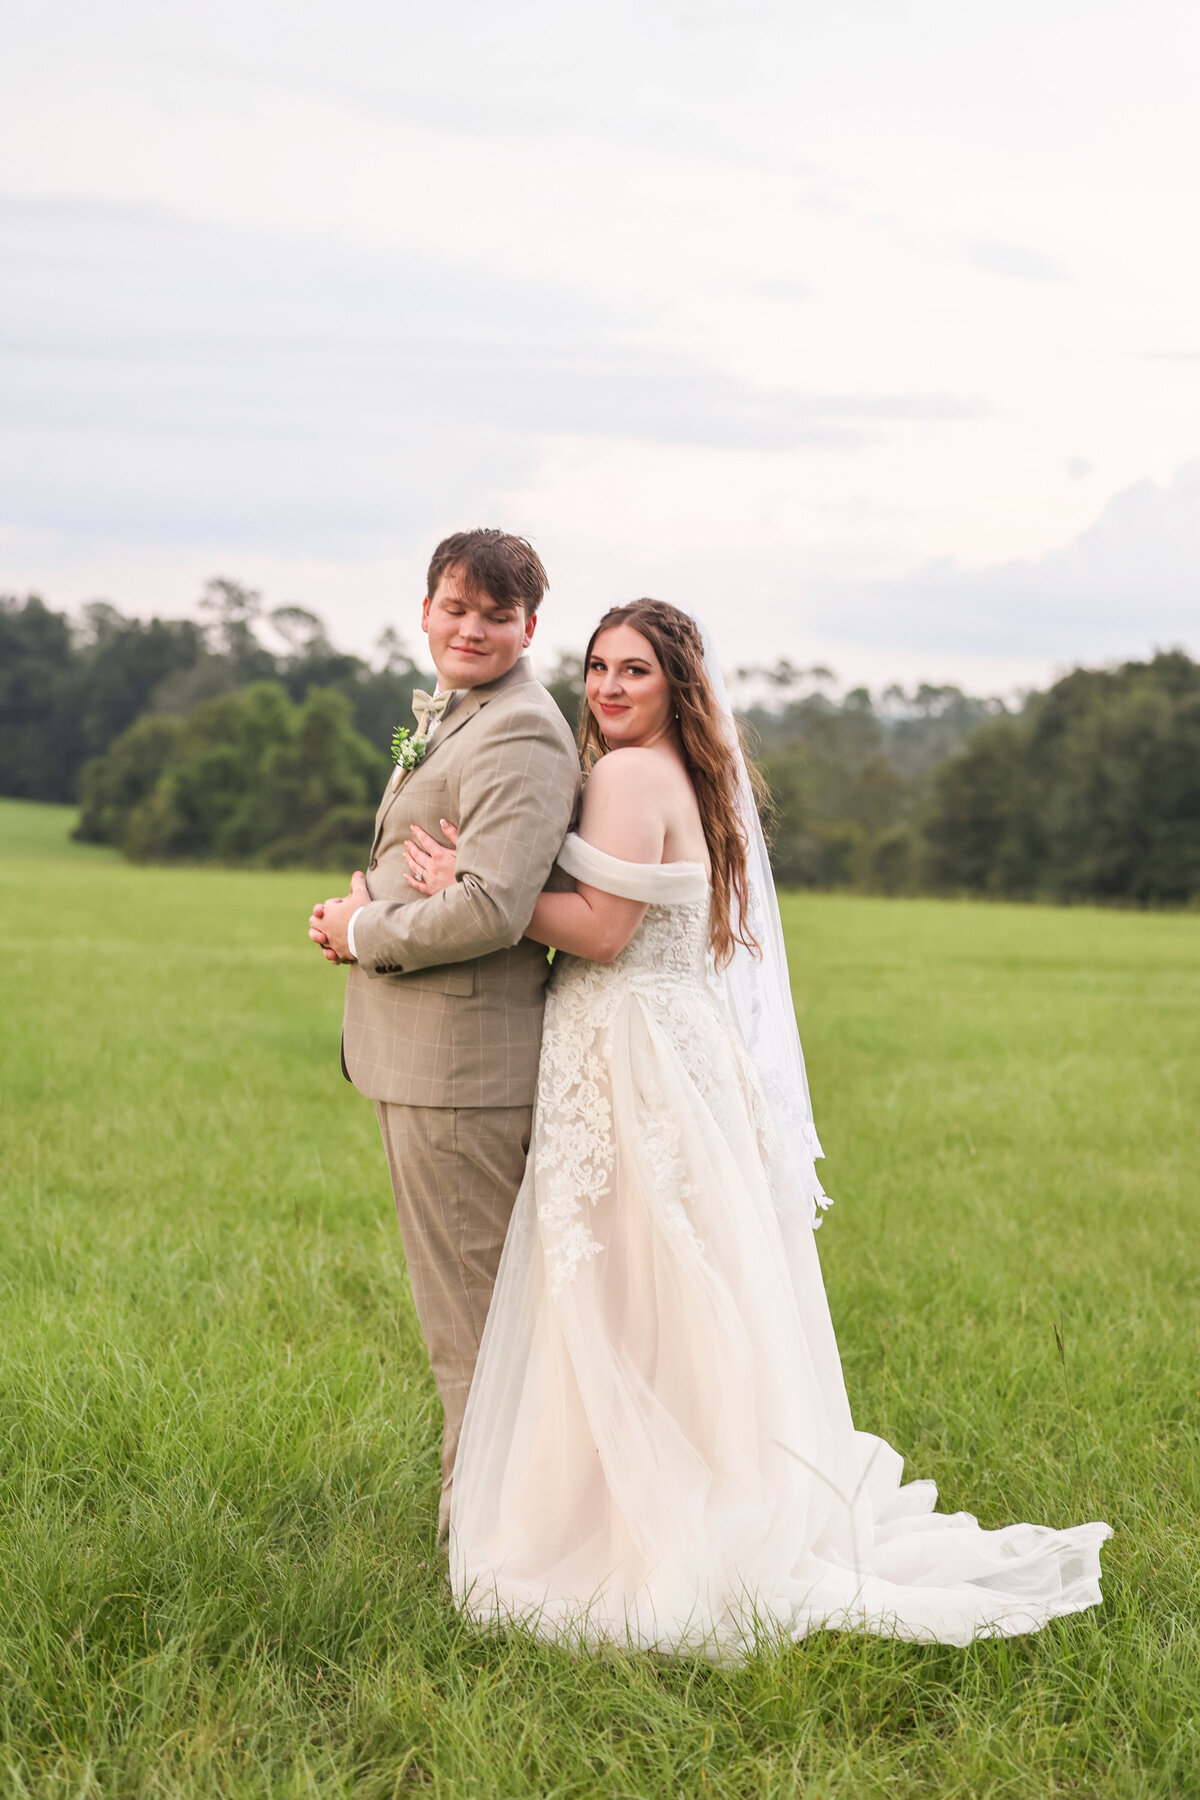 groom wearing light brown suit looking over shoulder at his bride wearing white tulle dress in grassy area